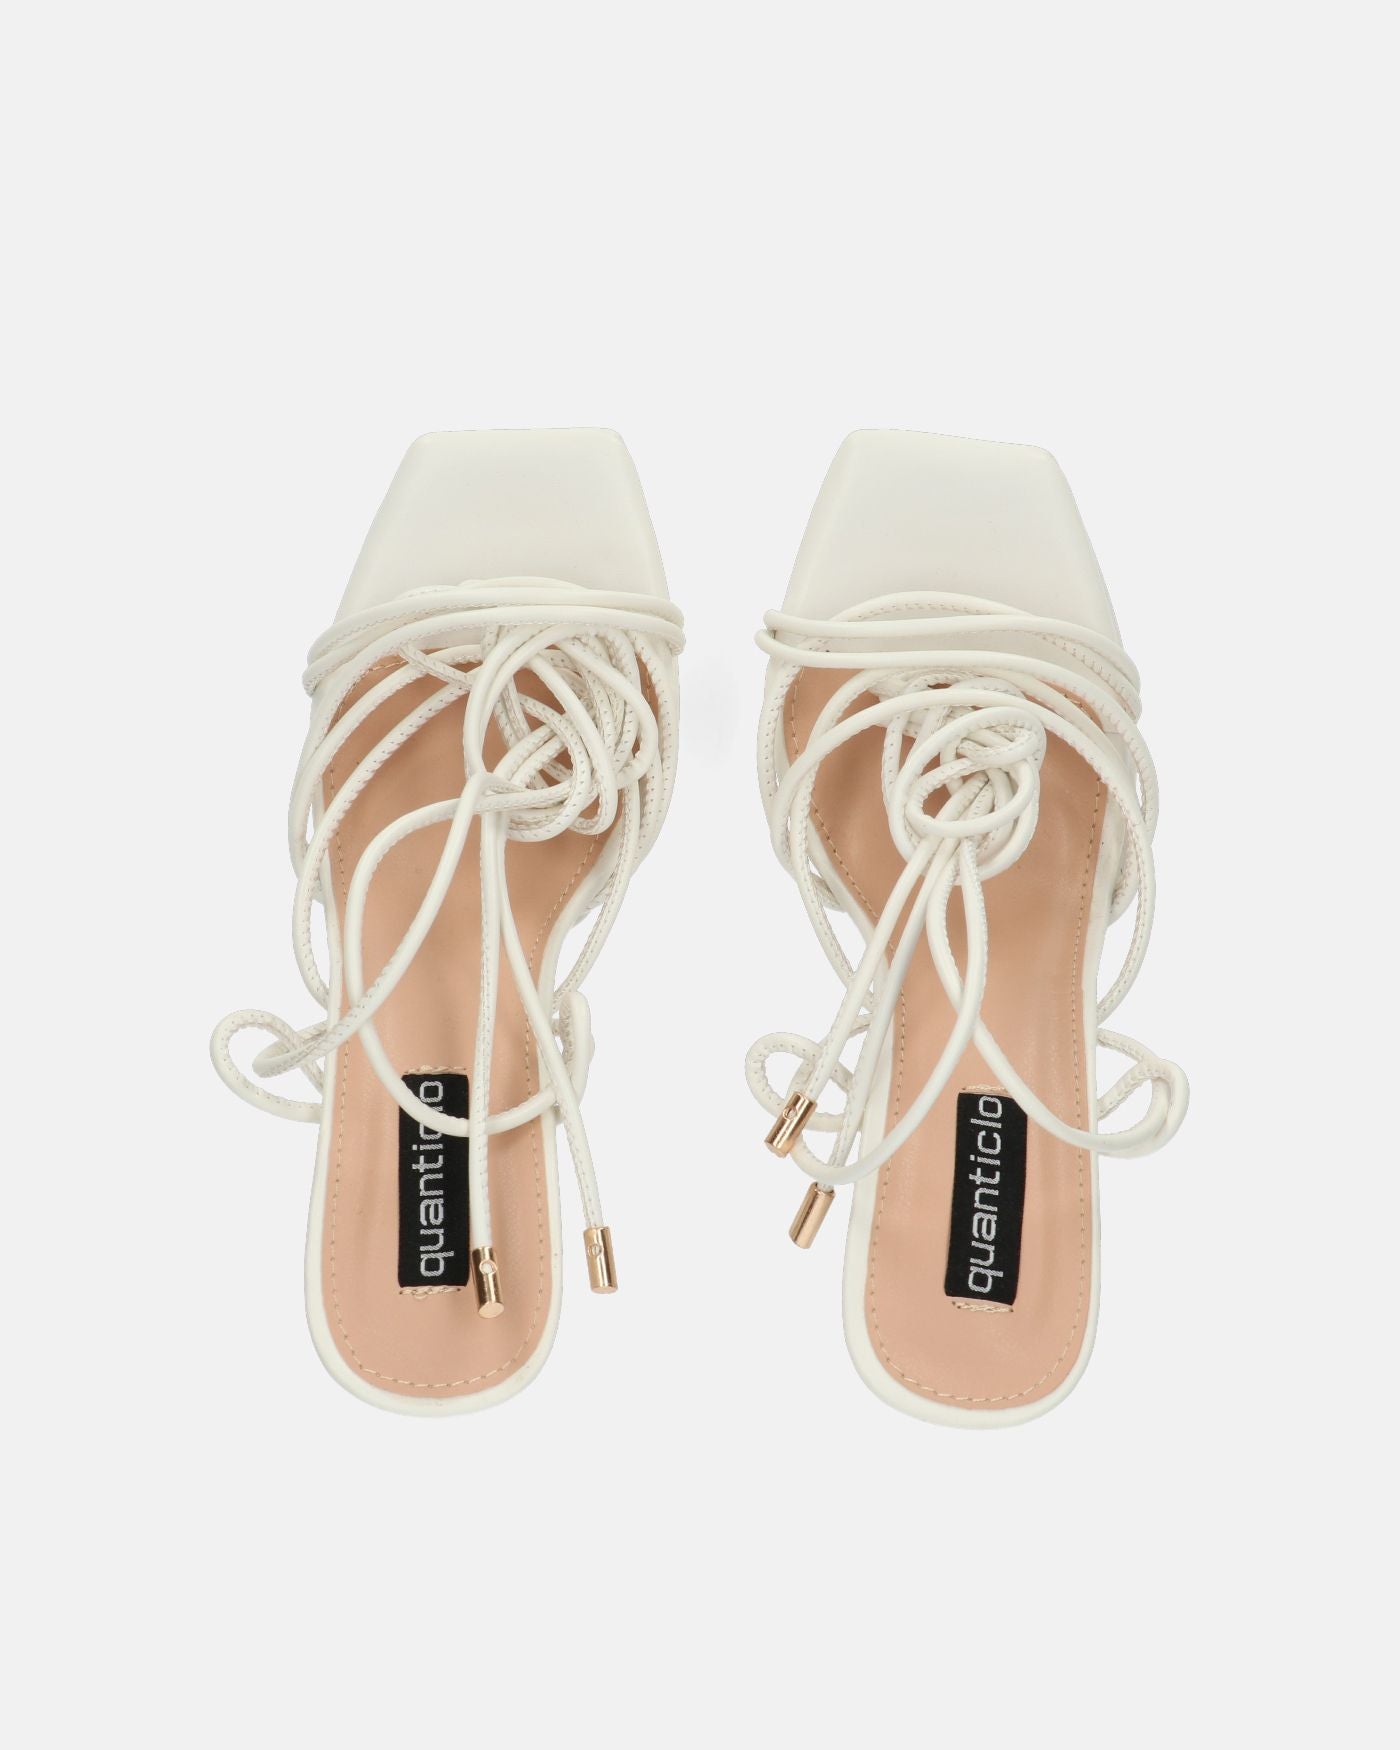 DELILA - white sandals with high heel and platform